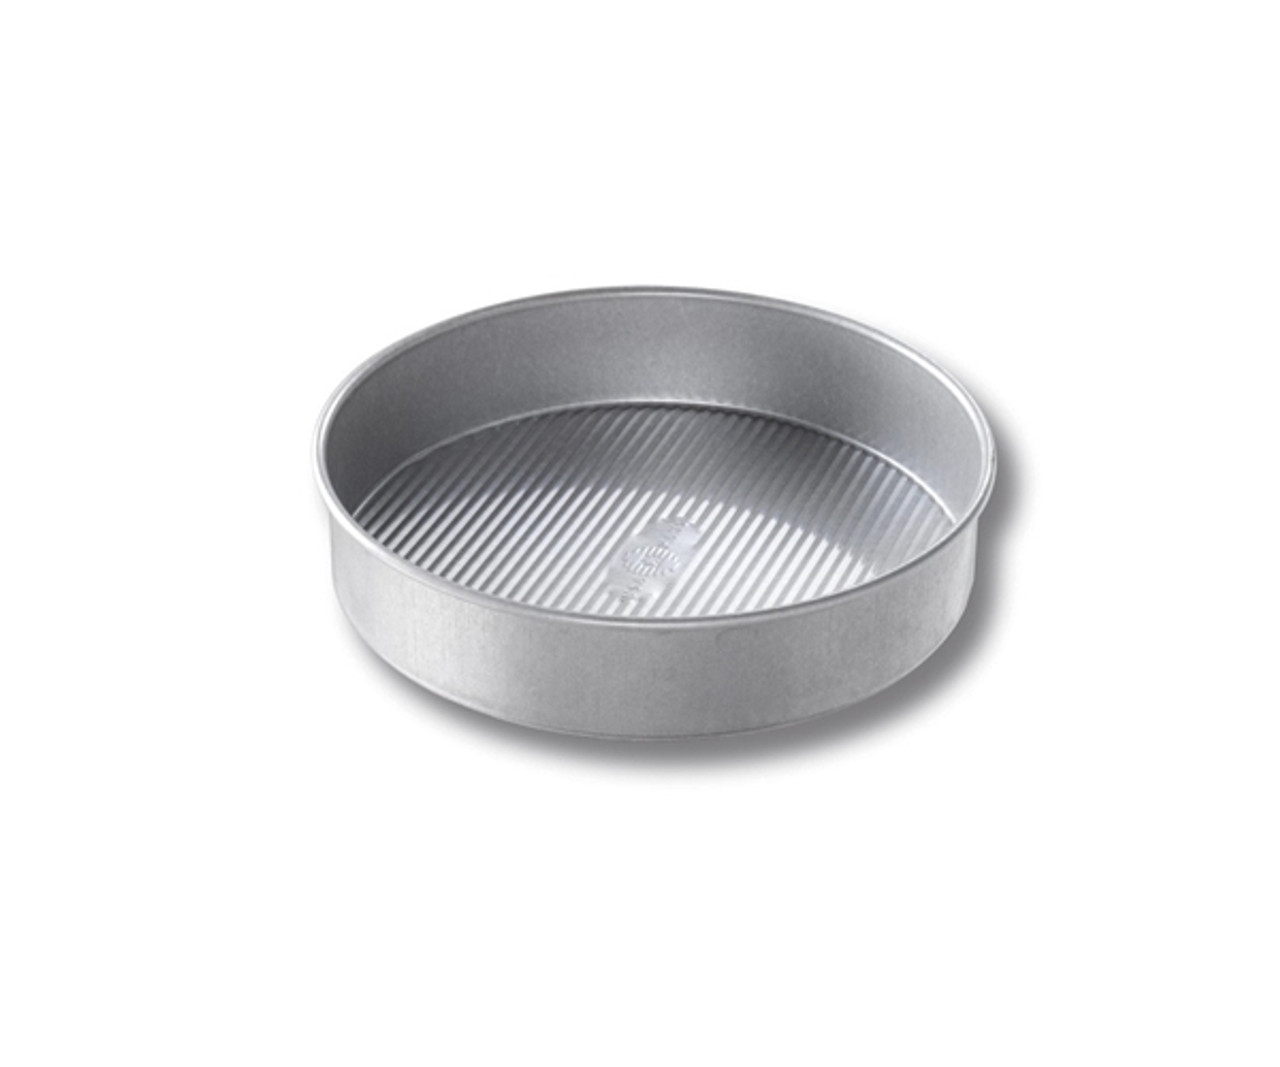 USA Pan Bakeware Square Cake Pan, 9 inch, Nonstick & Quick Release Coating,  Made in the USA from Aluminized Steel